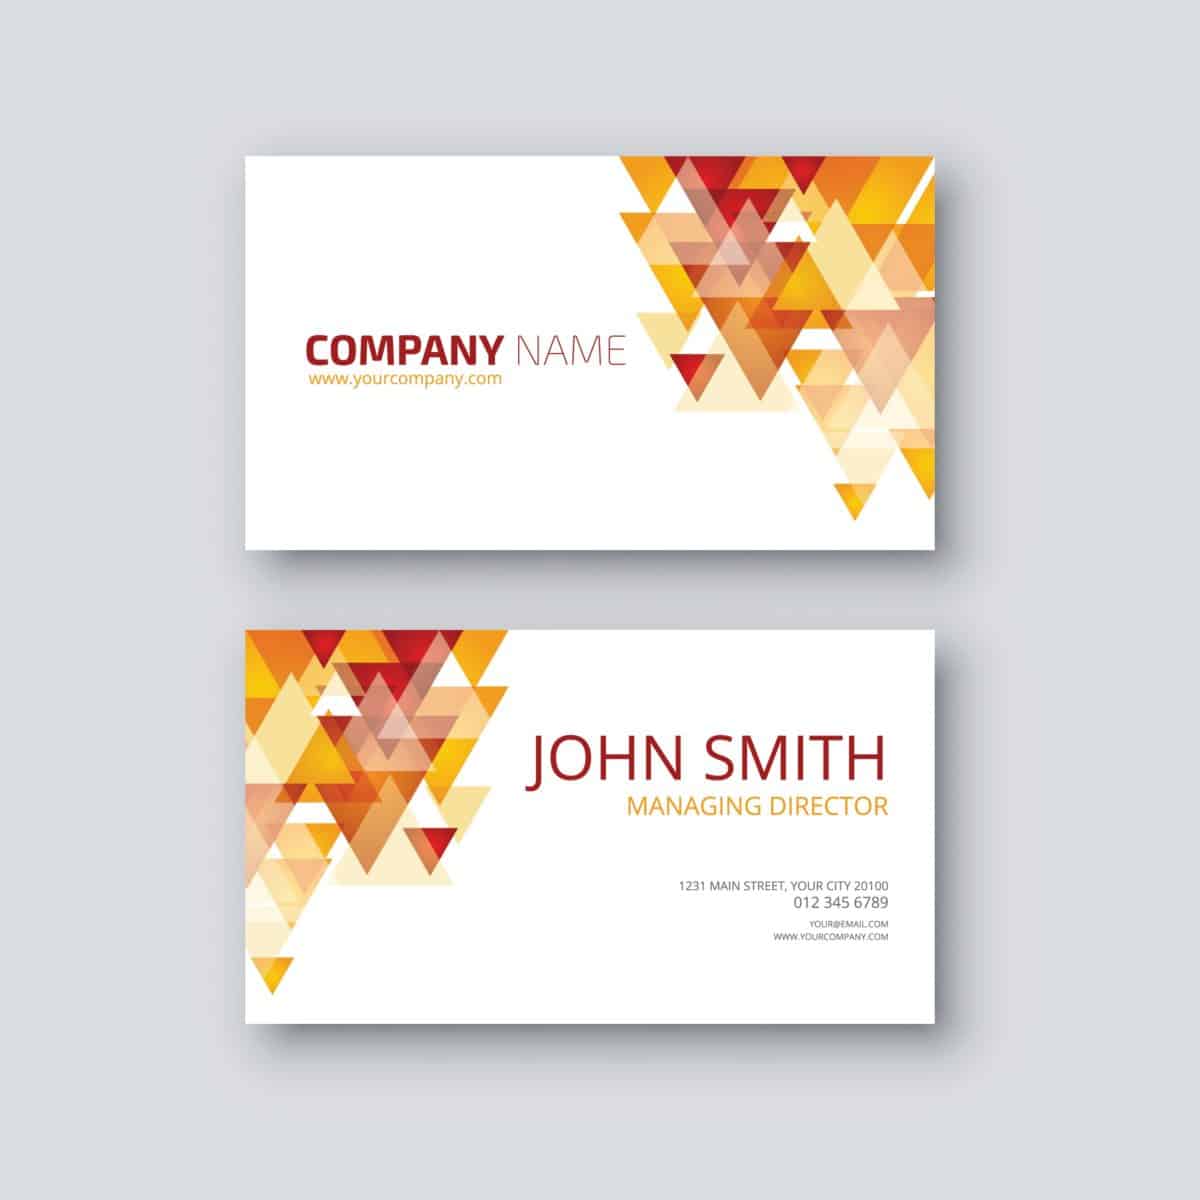 Your homepage = your business card